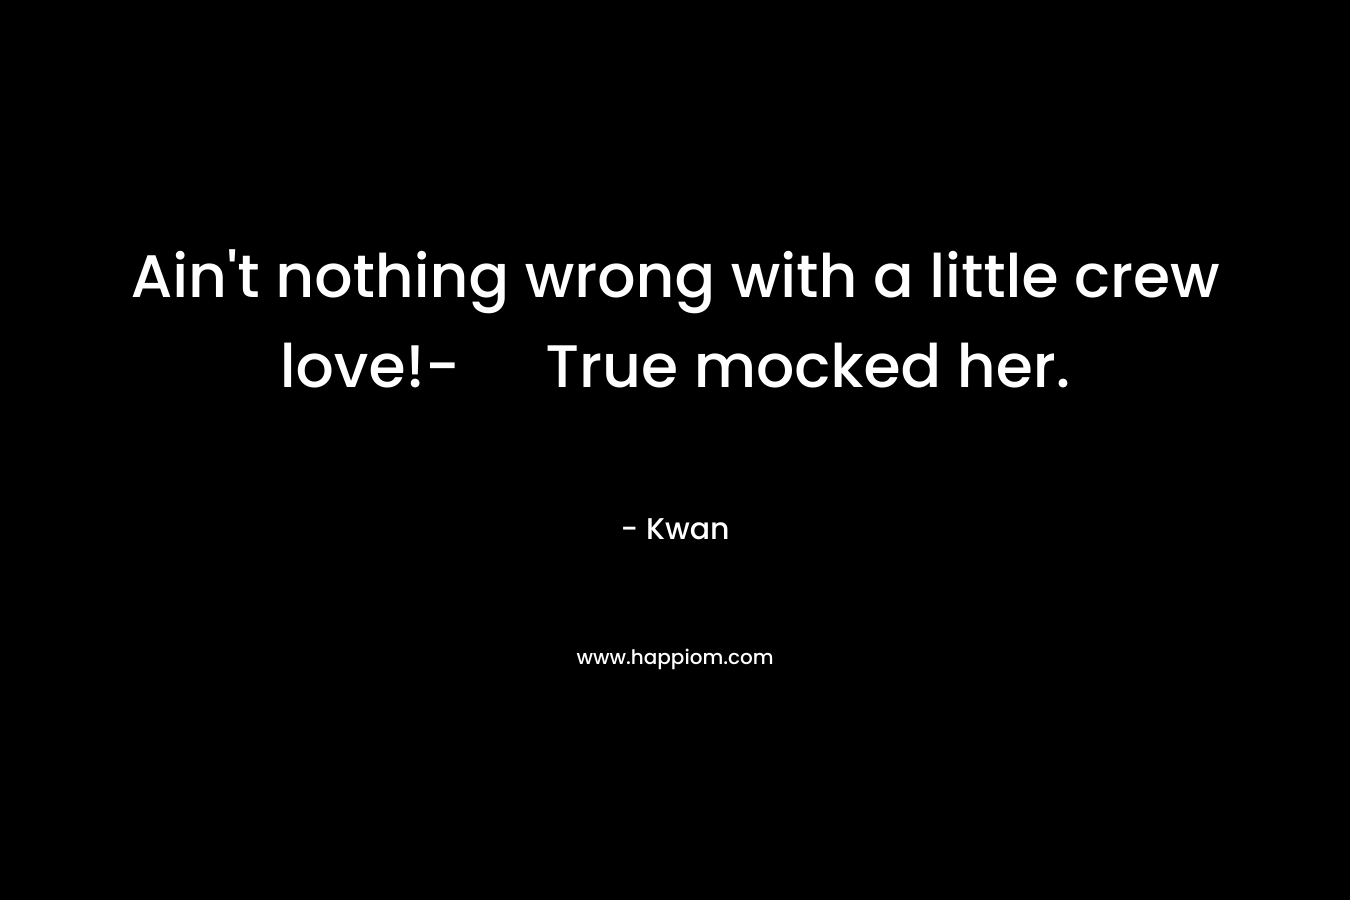 Ain’t nothing wrong with a little crew love!- True mocked her. – Kwan